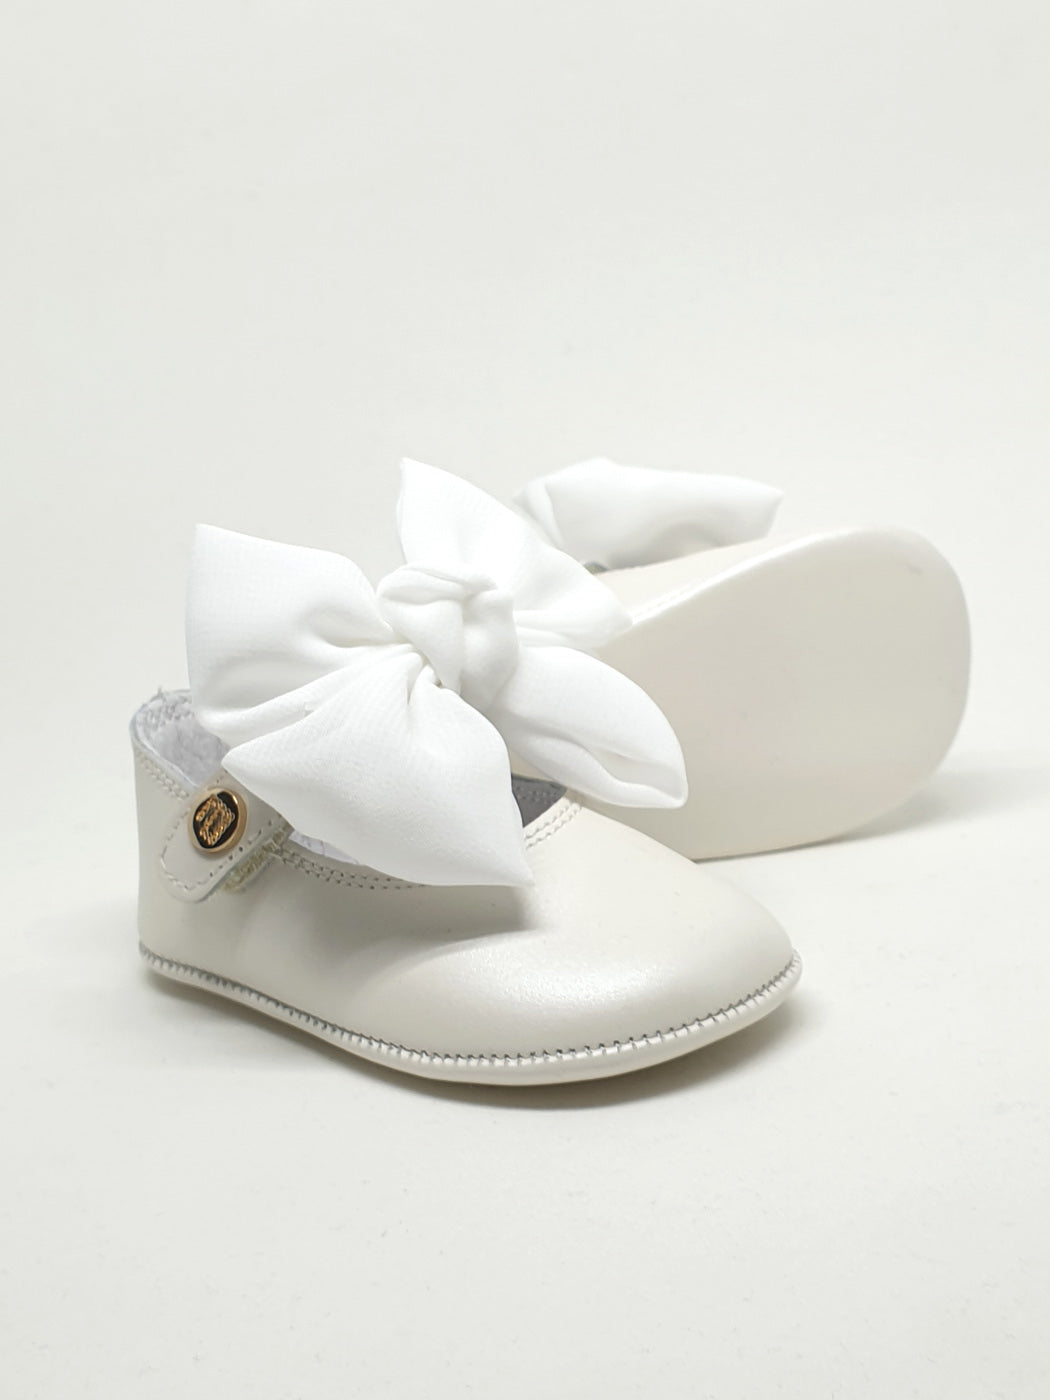 Baby's leather shoes with a bow